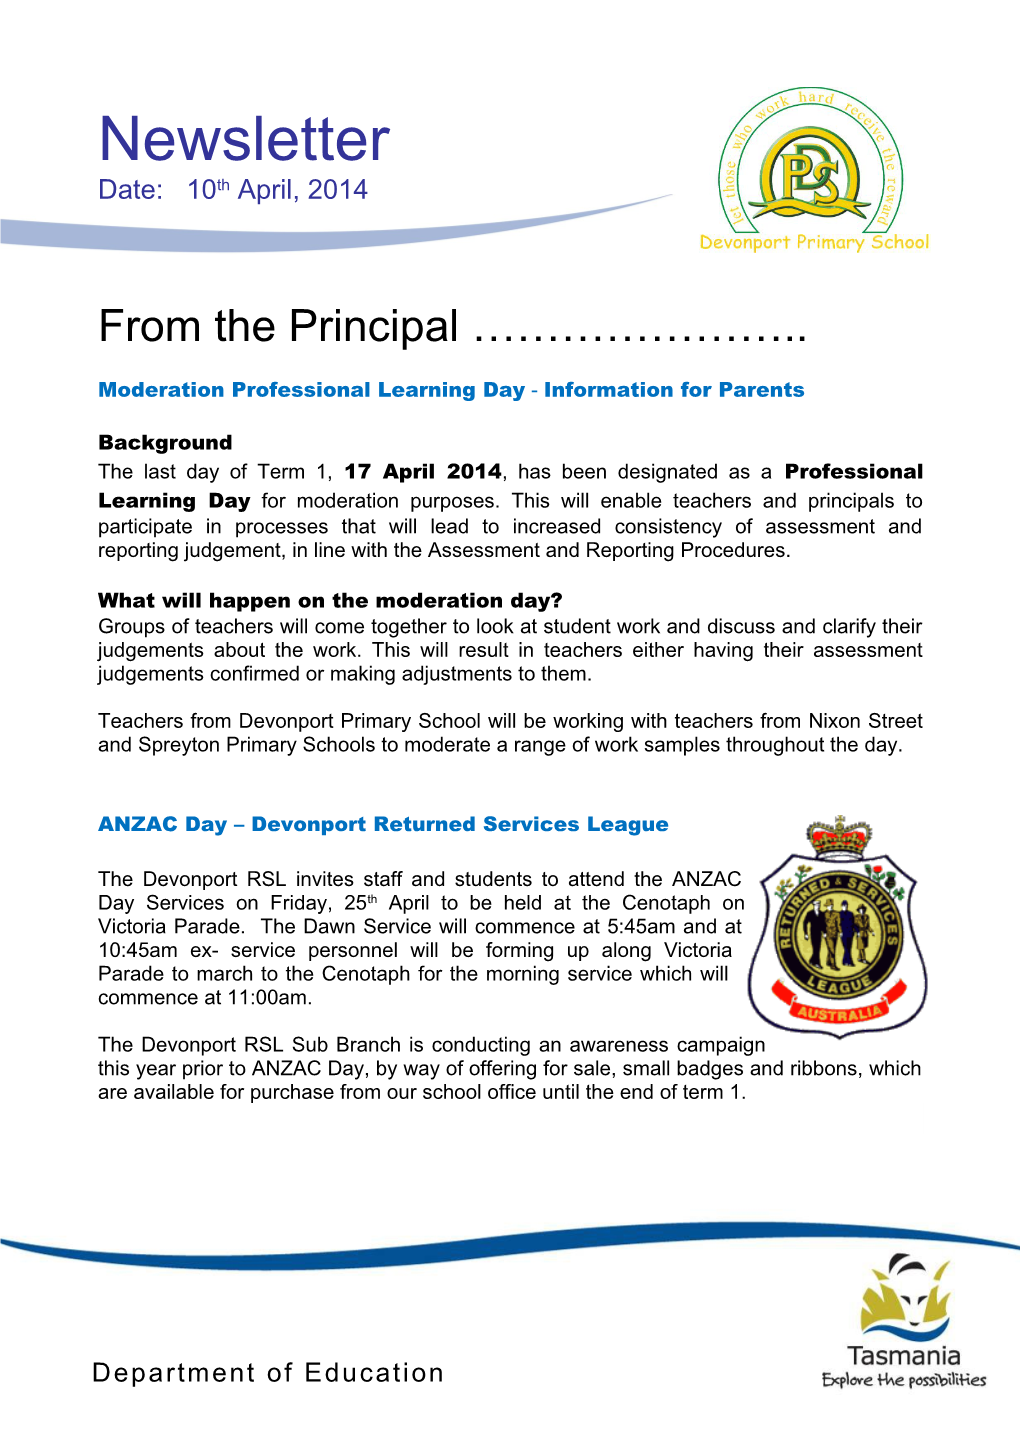 Moderation Professional Learning Day - Information for Parents